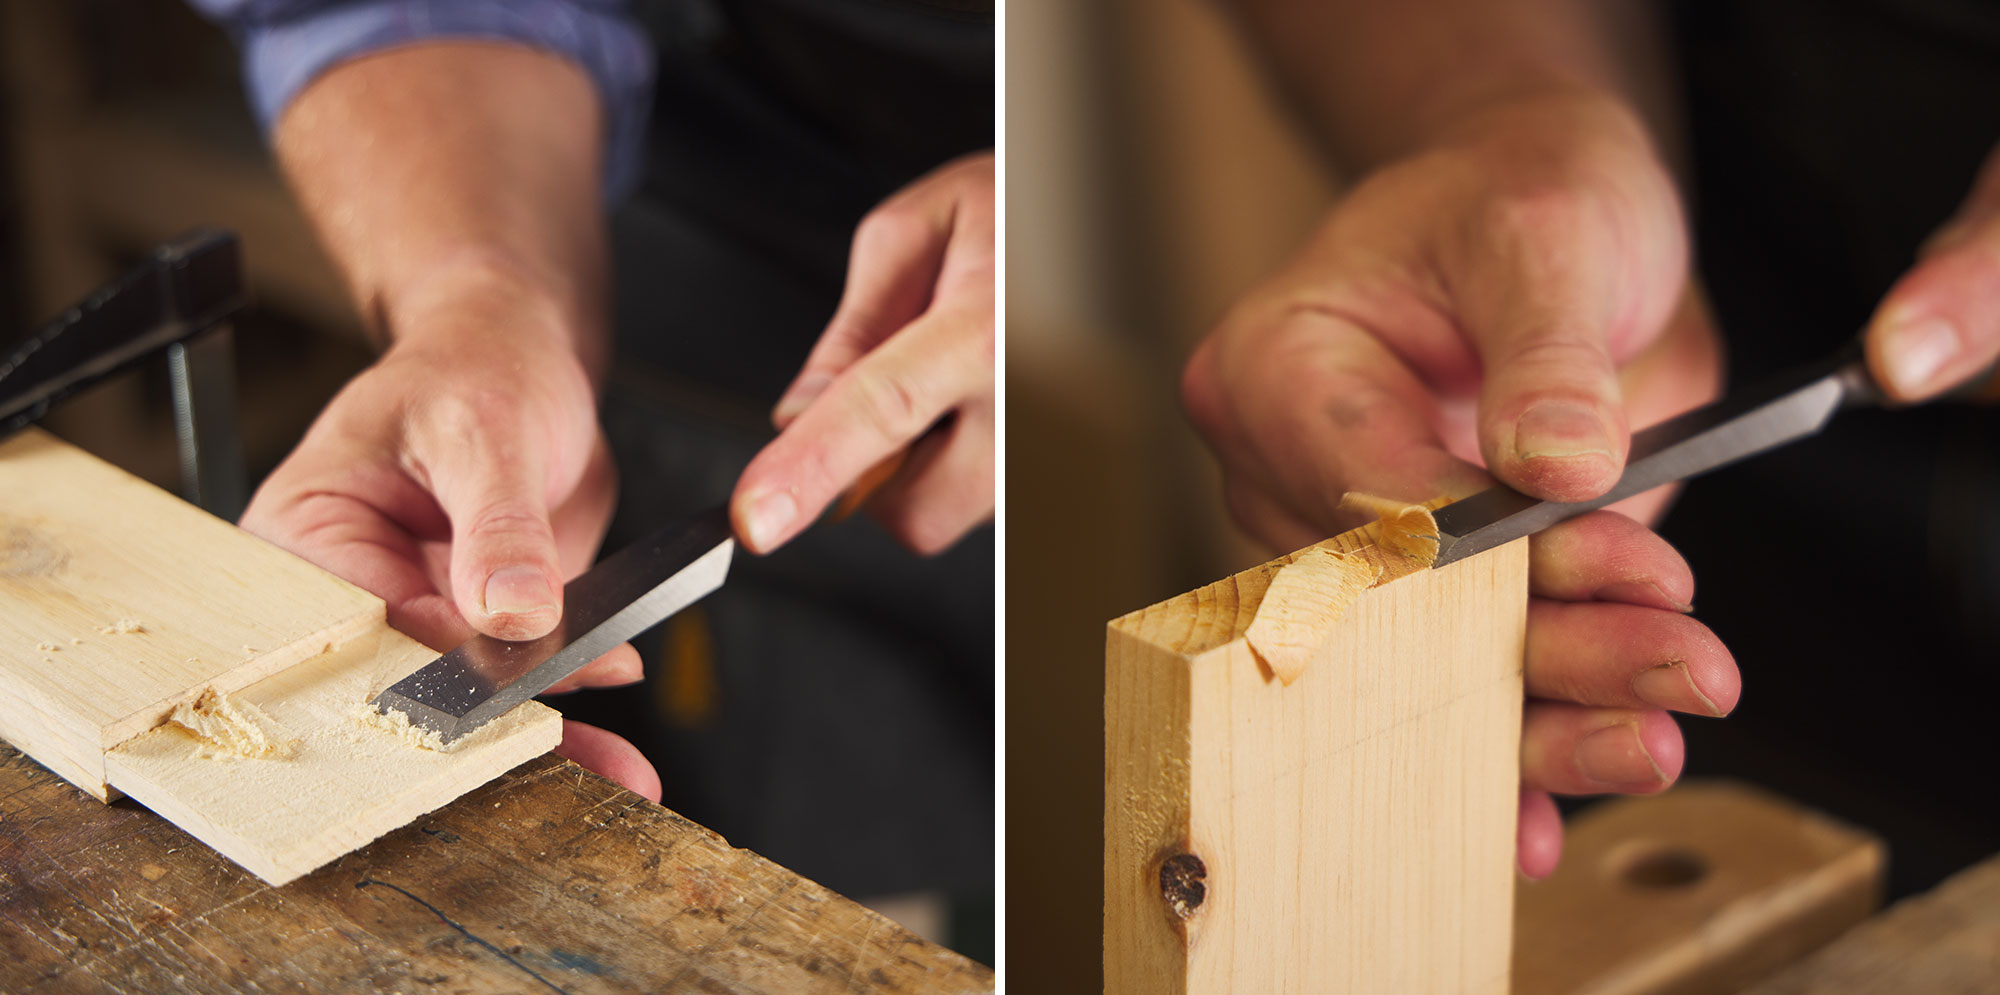 Image left: Paring a tenon cheek with a chisel. Image right: Horizontal paring of the end of a board.